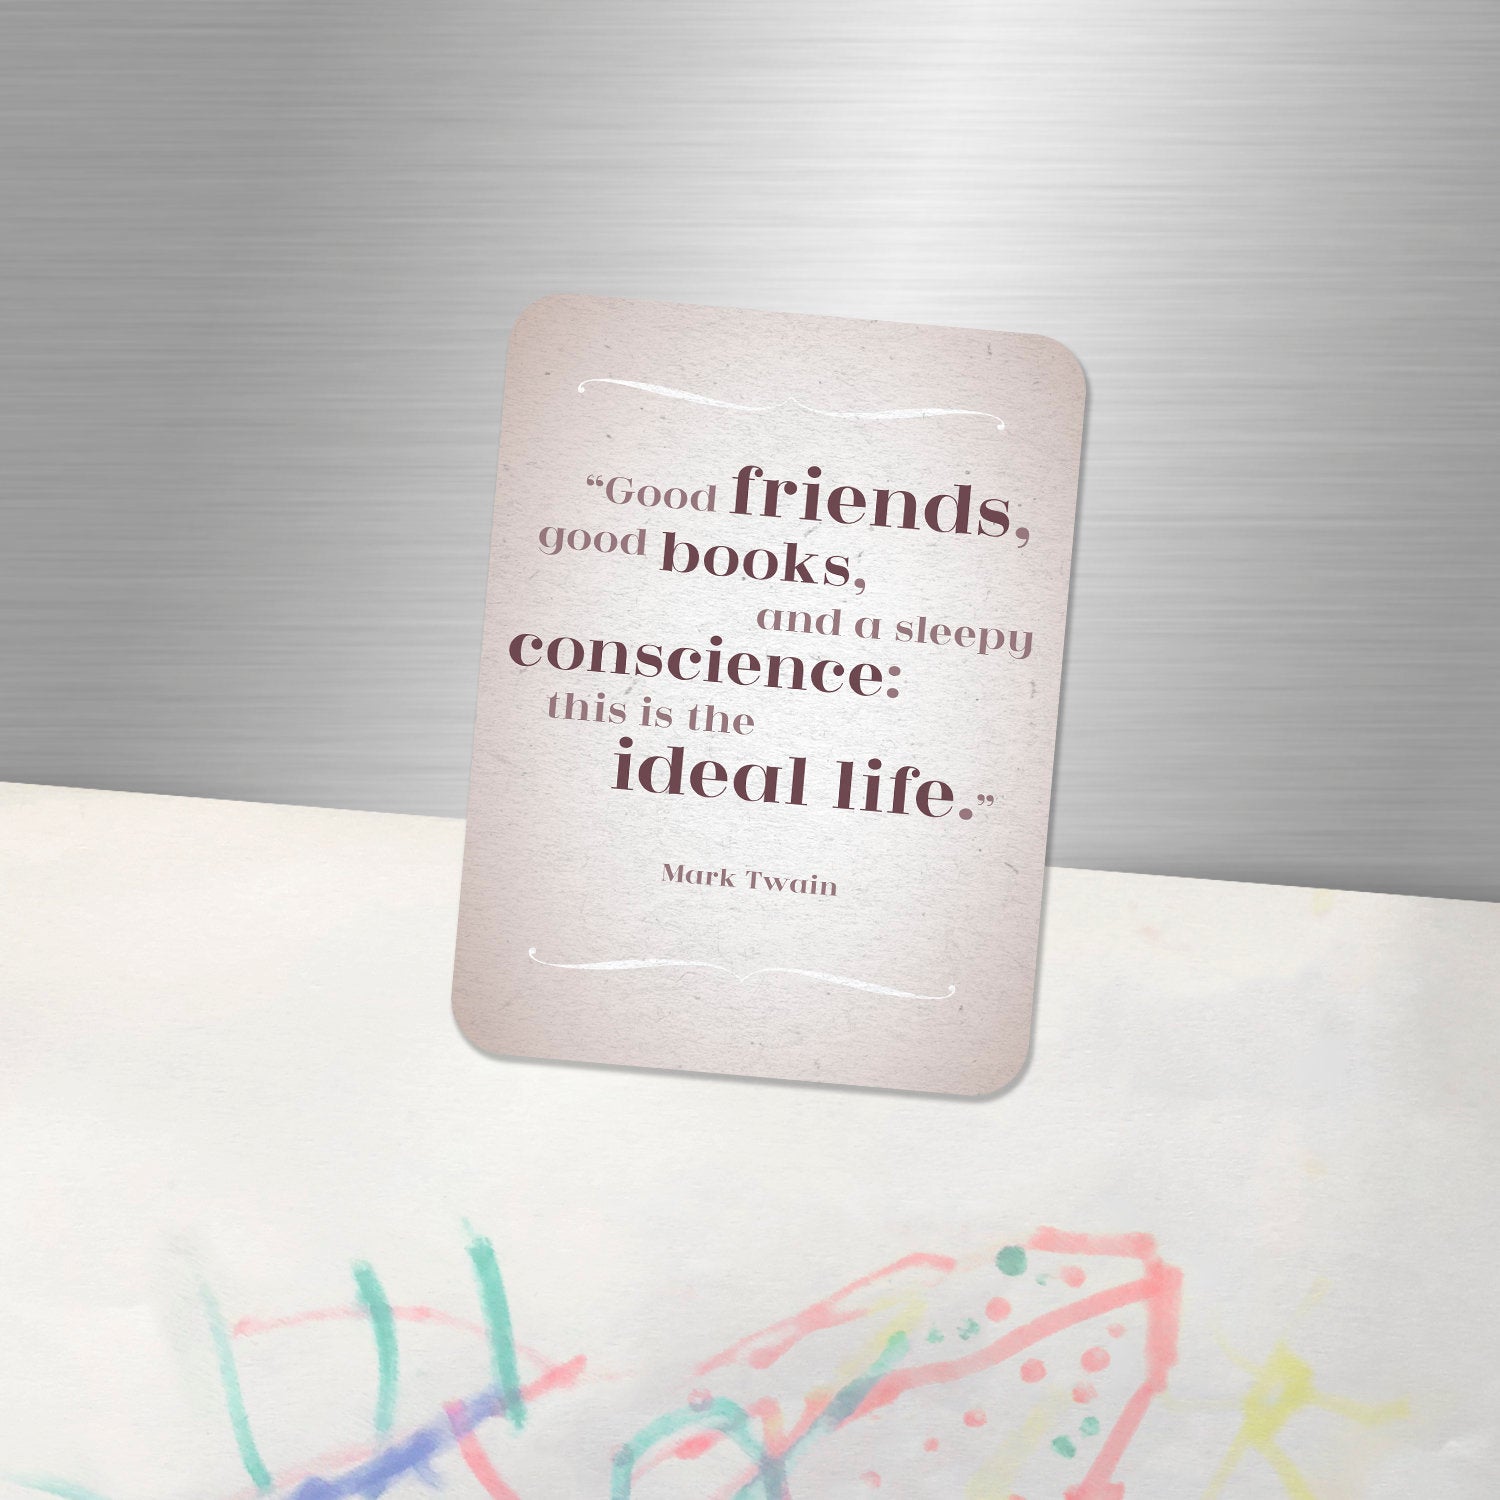 Fridge Magnet "Good friends, good books, and a sleepy conscience: this is the ideal life" - Mark Twain, great gift for friend